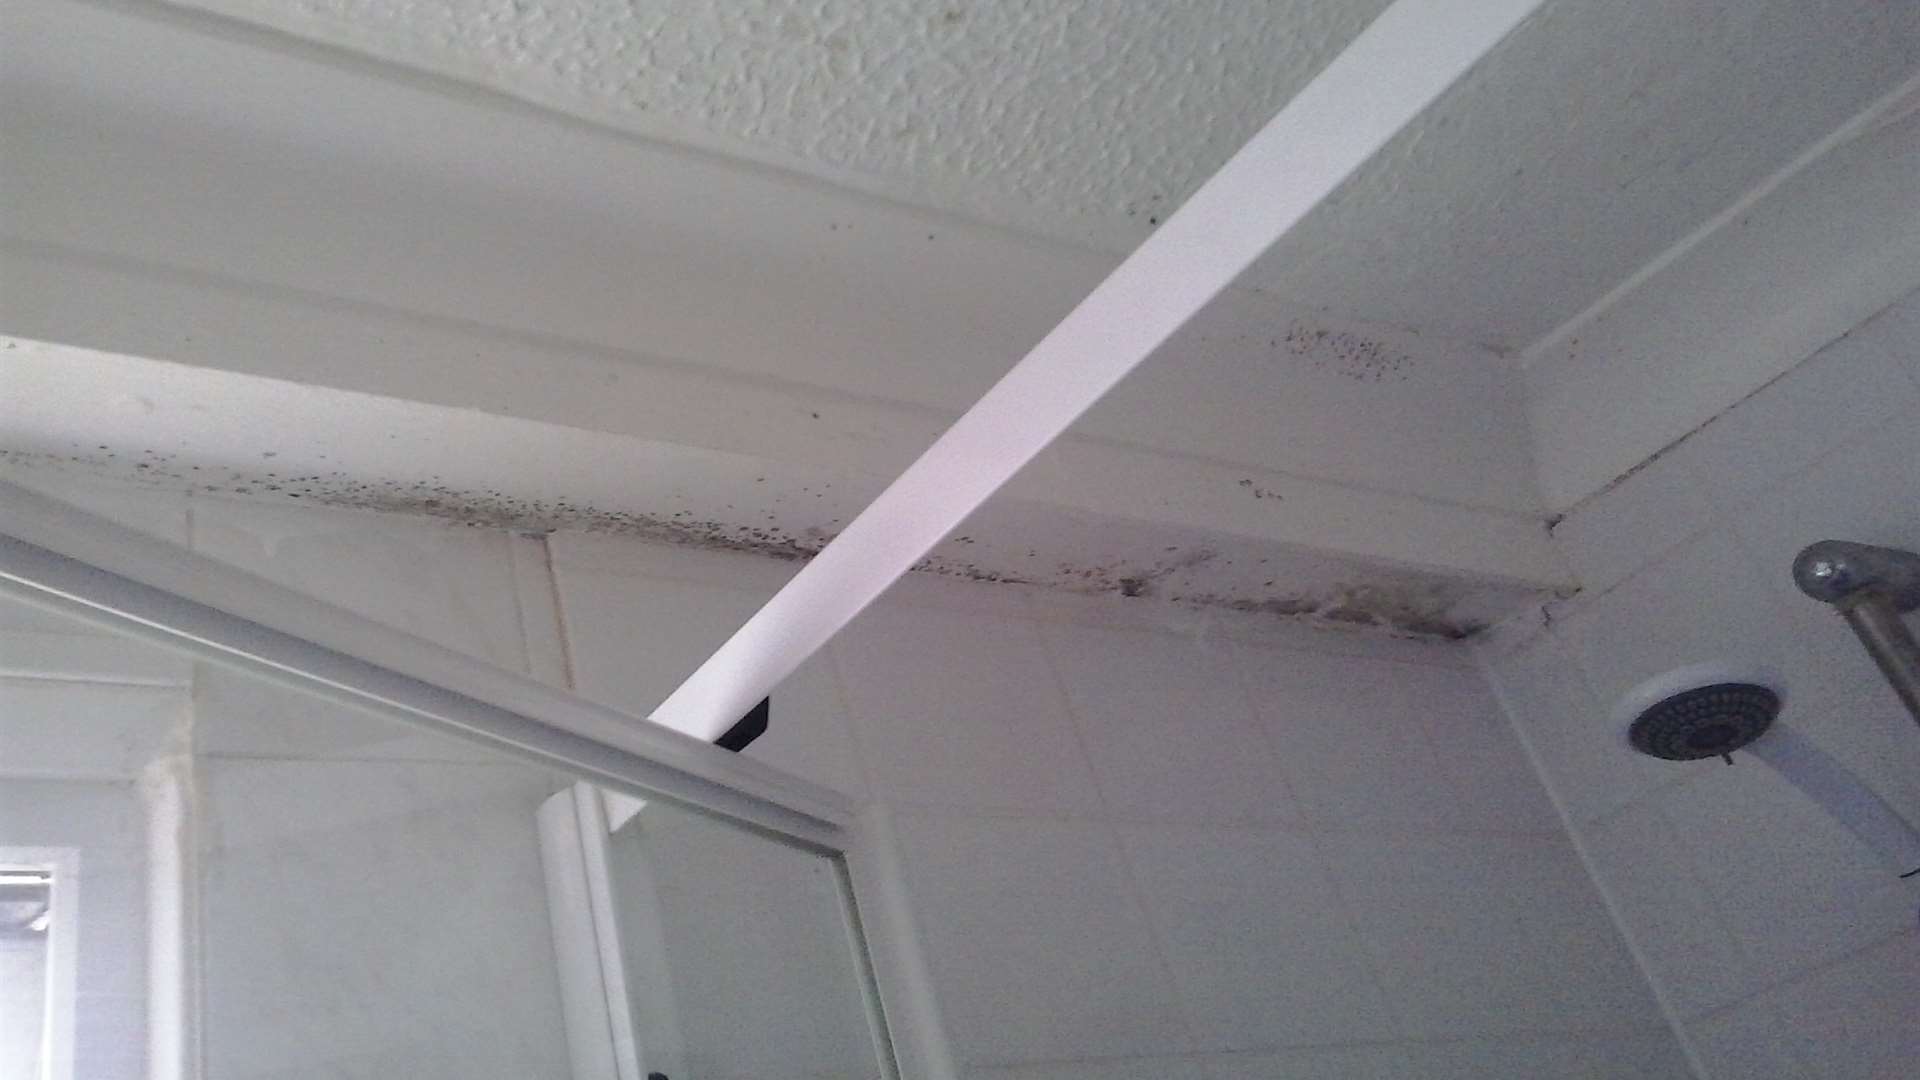 Mould was found on the chalet ceiling